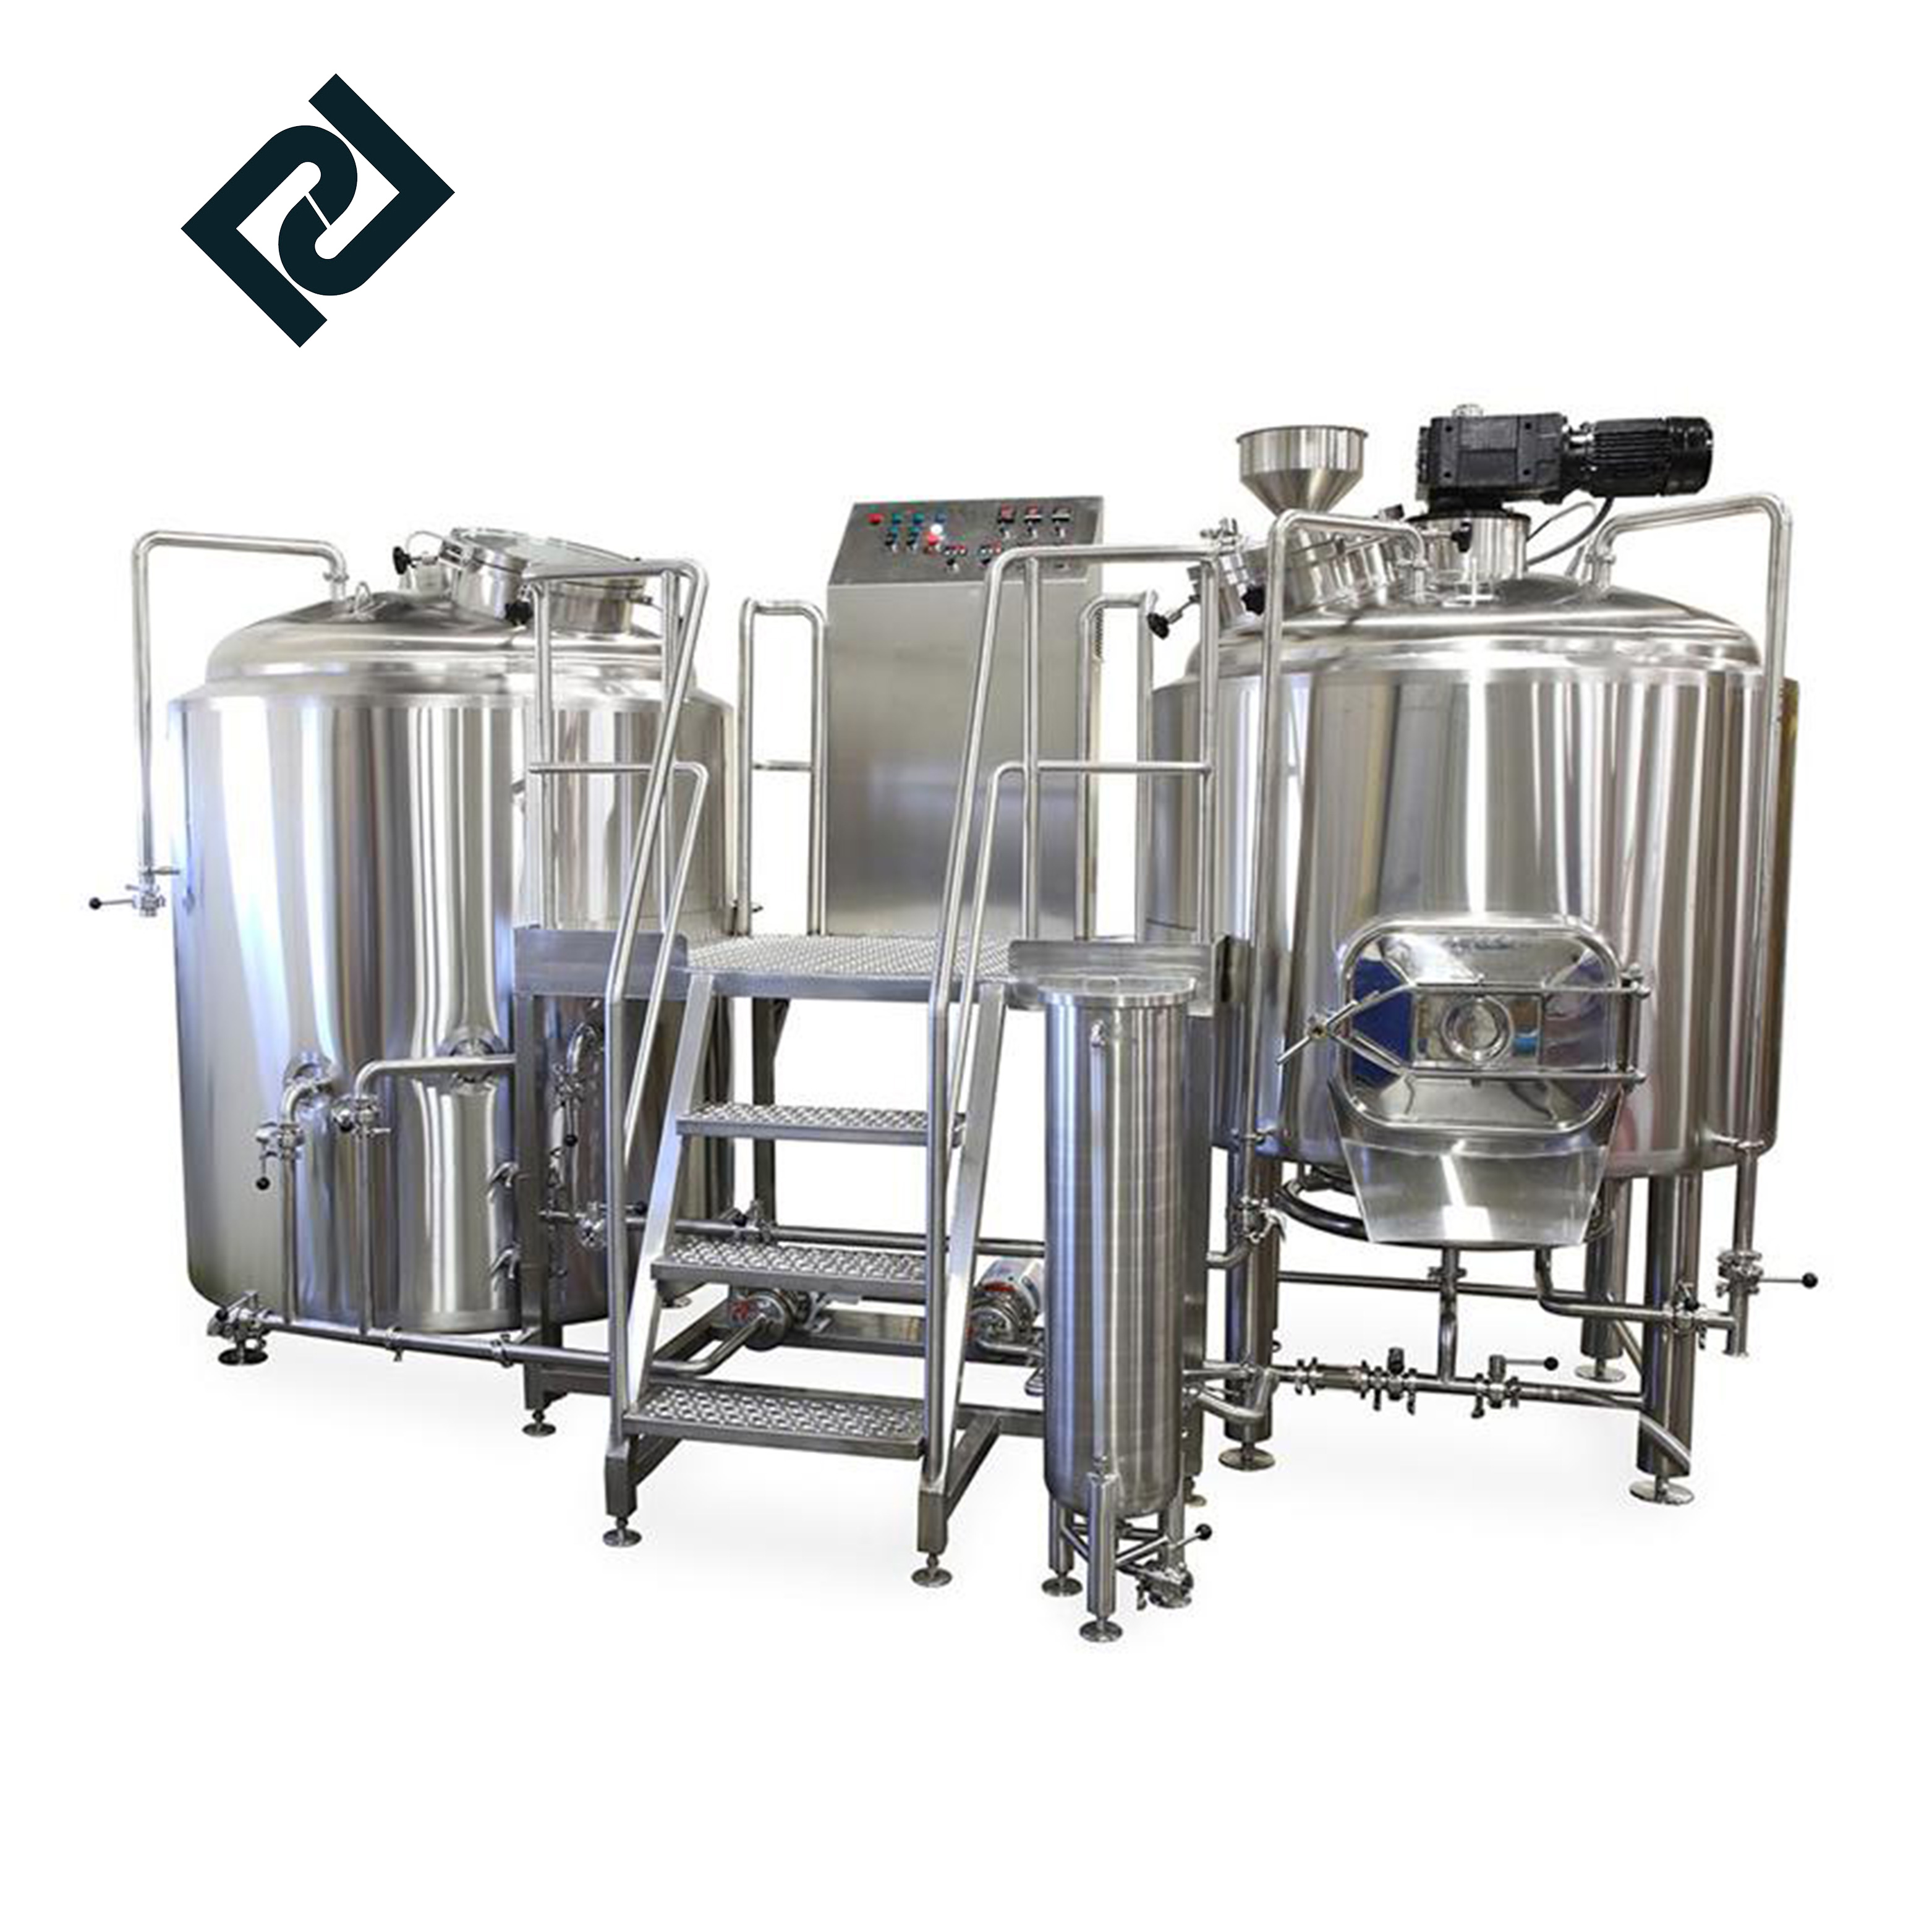 Leading Manufacturer for 30l Beer Brewing Equipment - 10bbl brite tank for beer 1000l beer fermenter tank 1000 liters beer brewing equipment – Pijiang